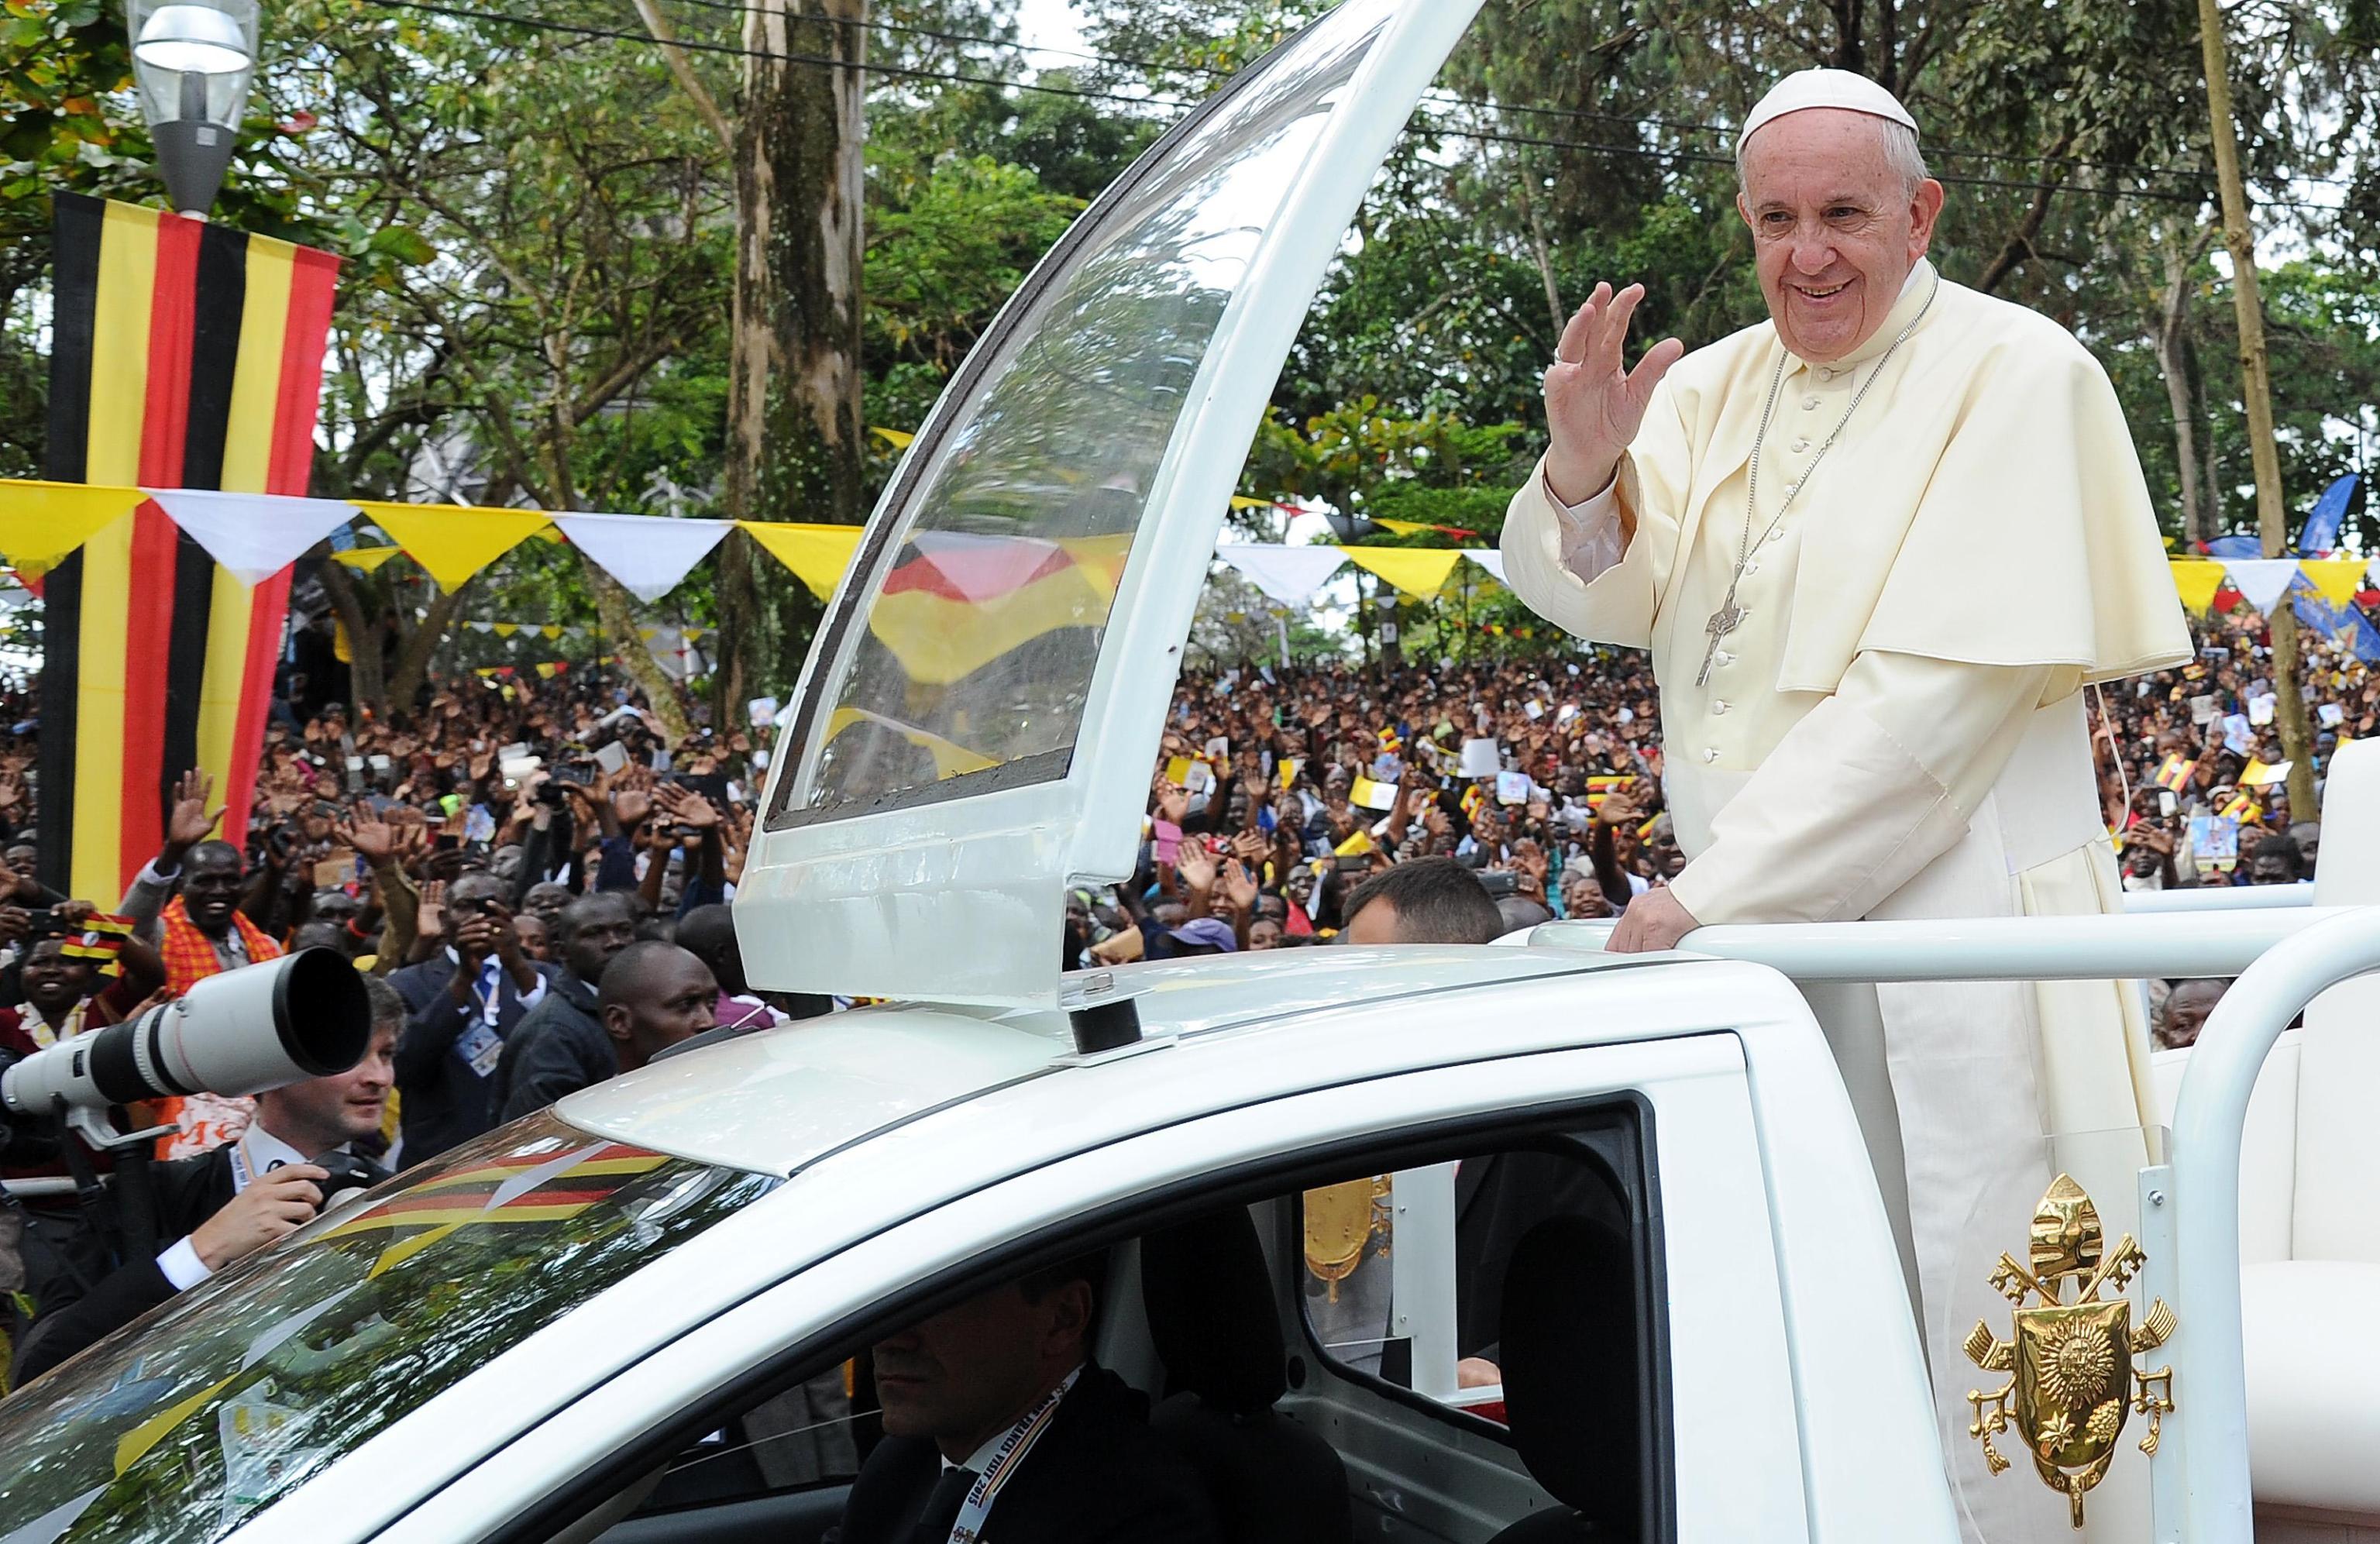 Pope Francis waves from the popemobile to the crowd of faithfull at his arrival at a Mass for the martyrs of Uganda celebrated by near the Catholic shrine of Namugongo in Kampala